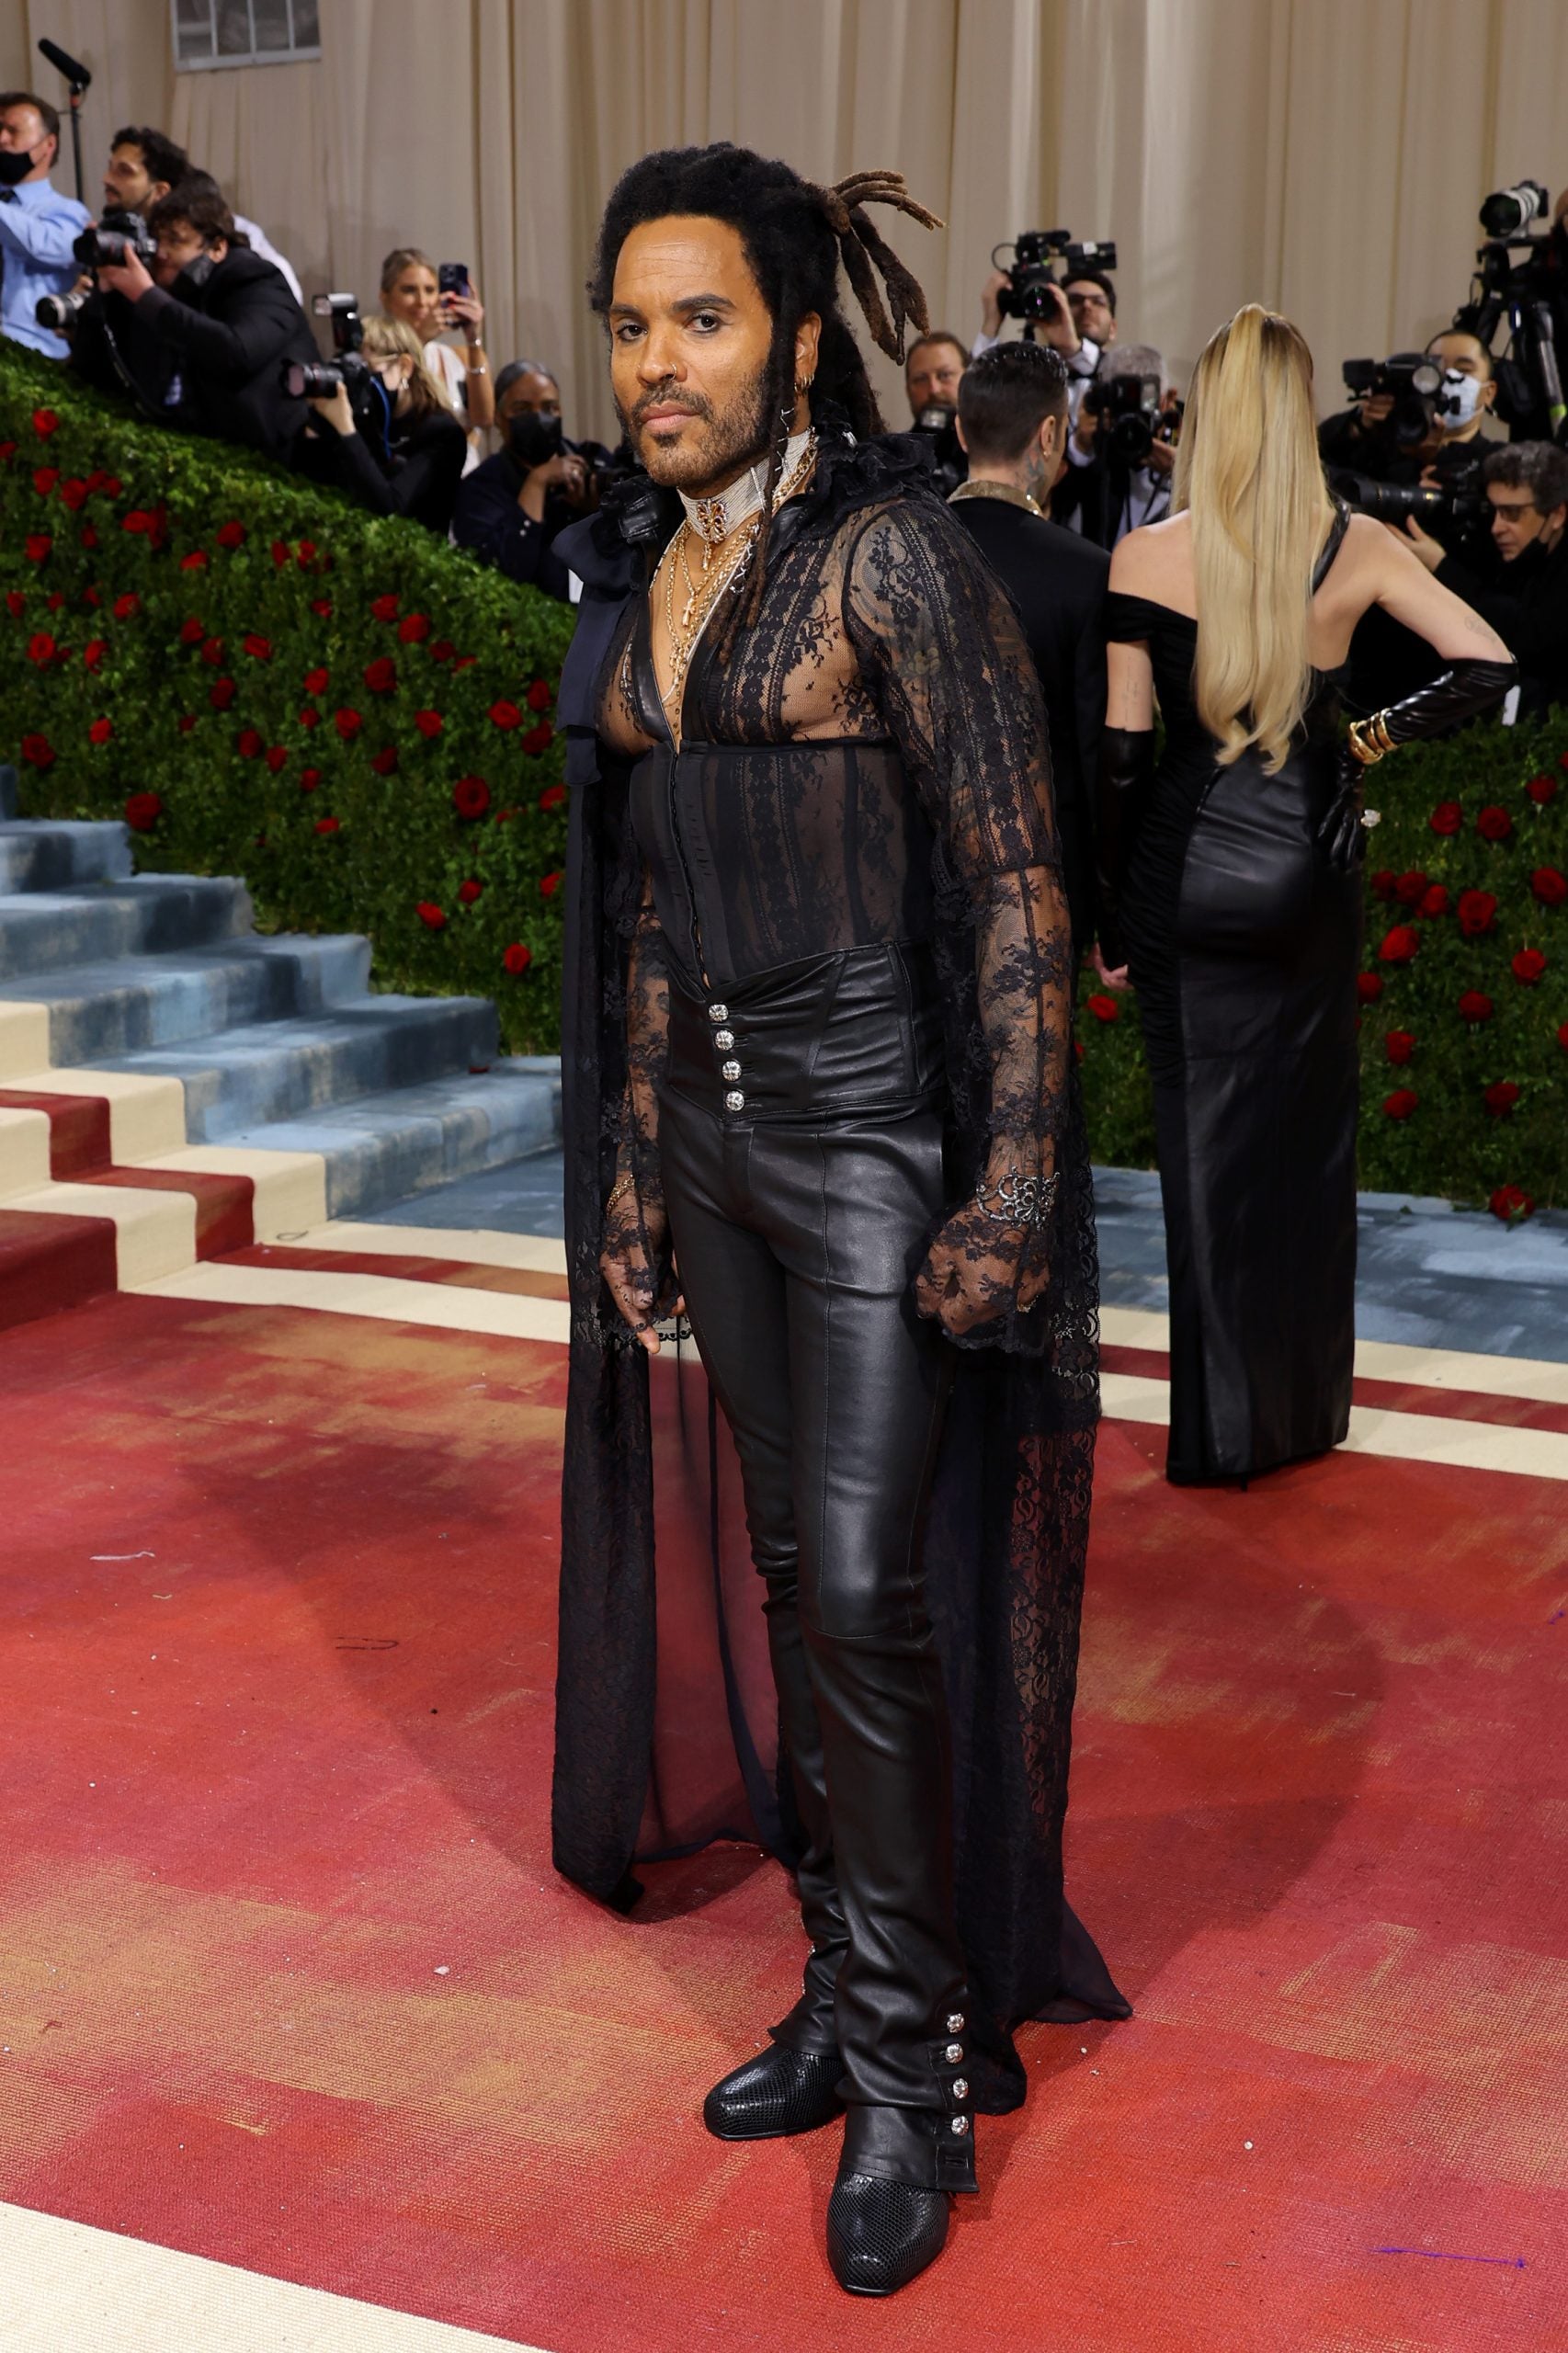 The Fellas Showed Up And Showed Out! Here Are The Best Male Looks From The 2022 Met Gala